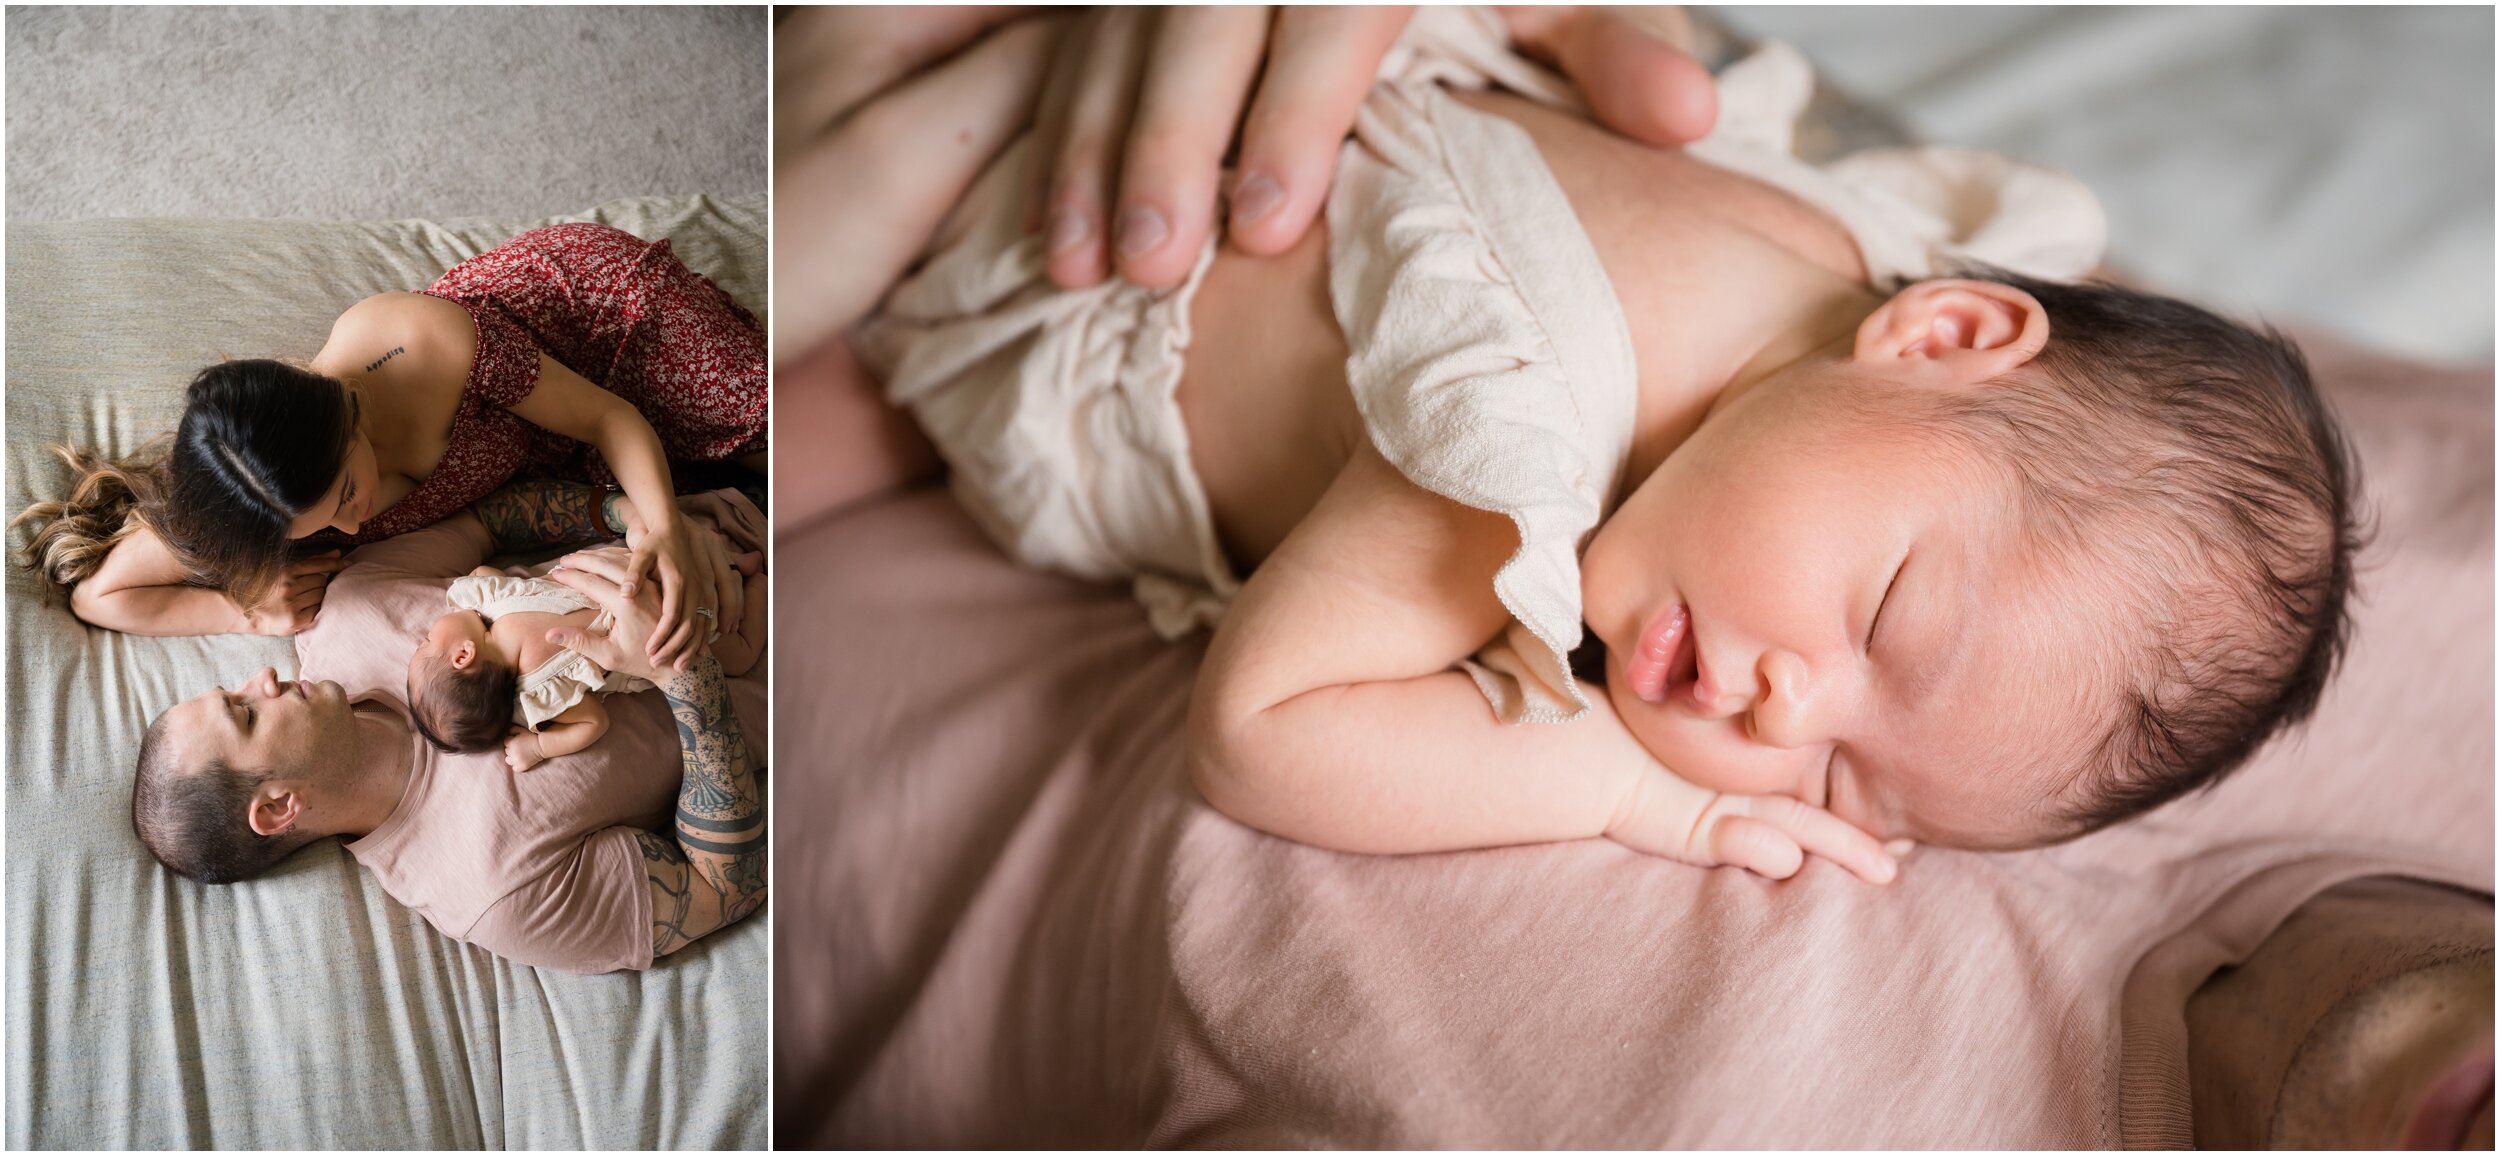 Bed photos with a newborn